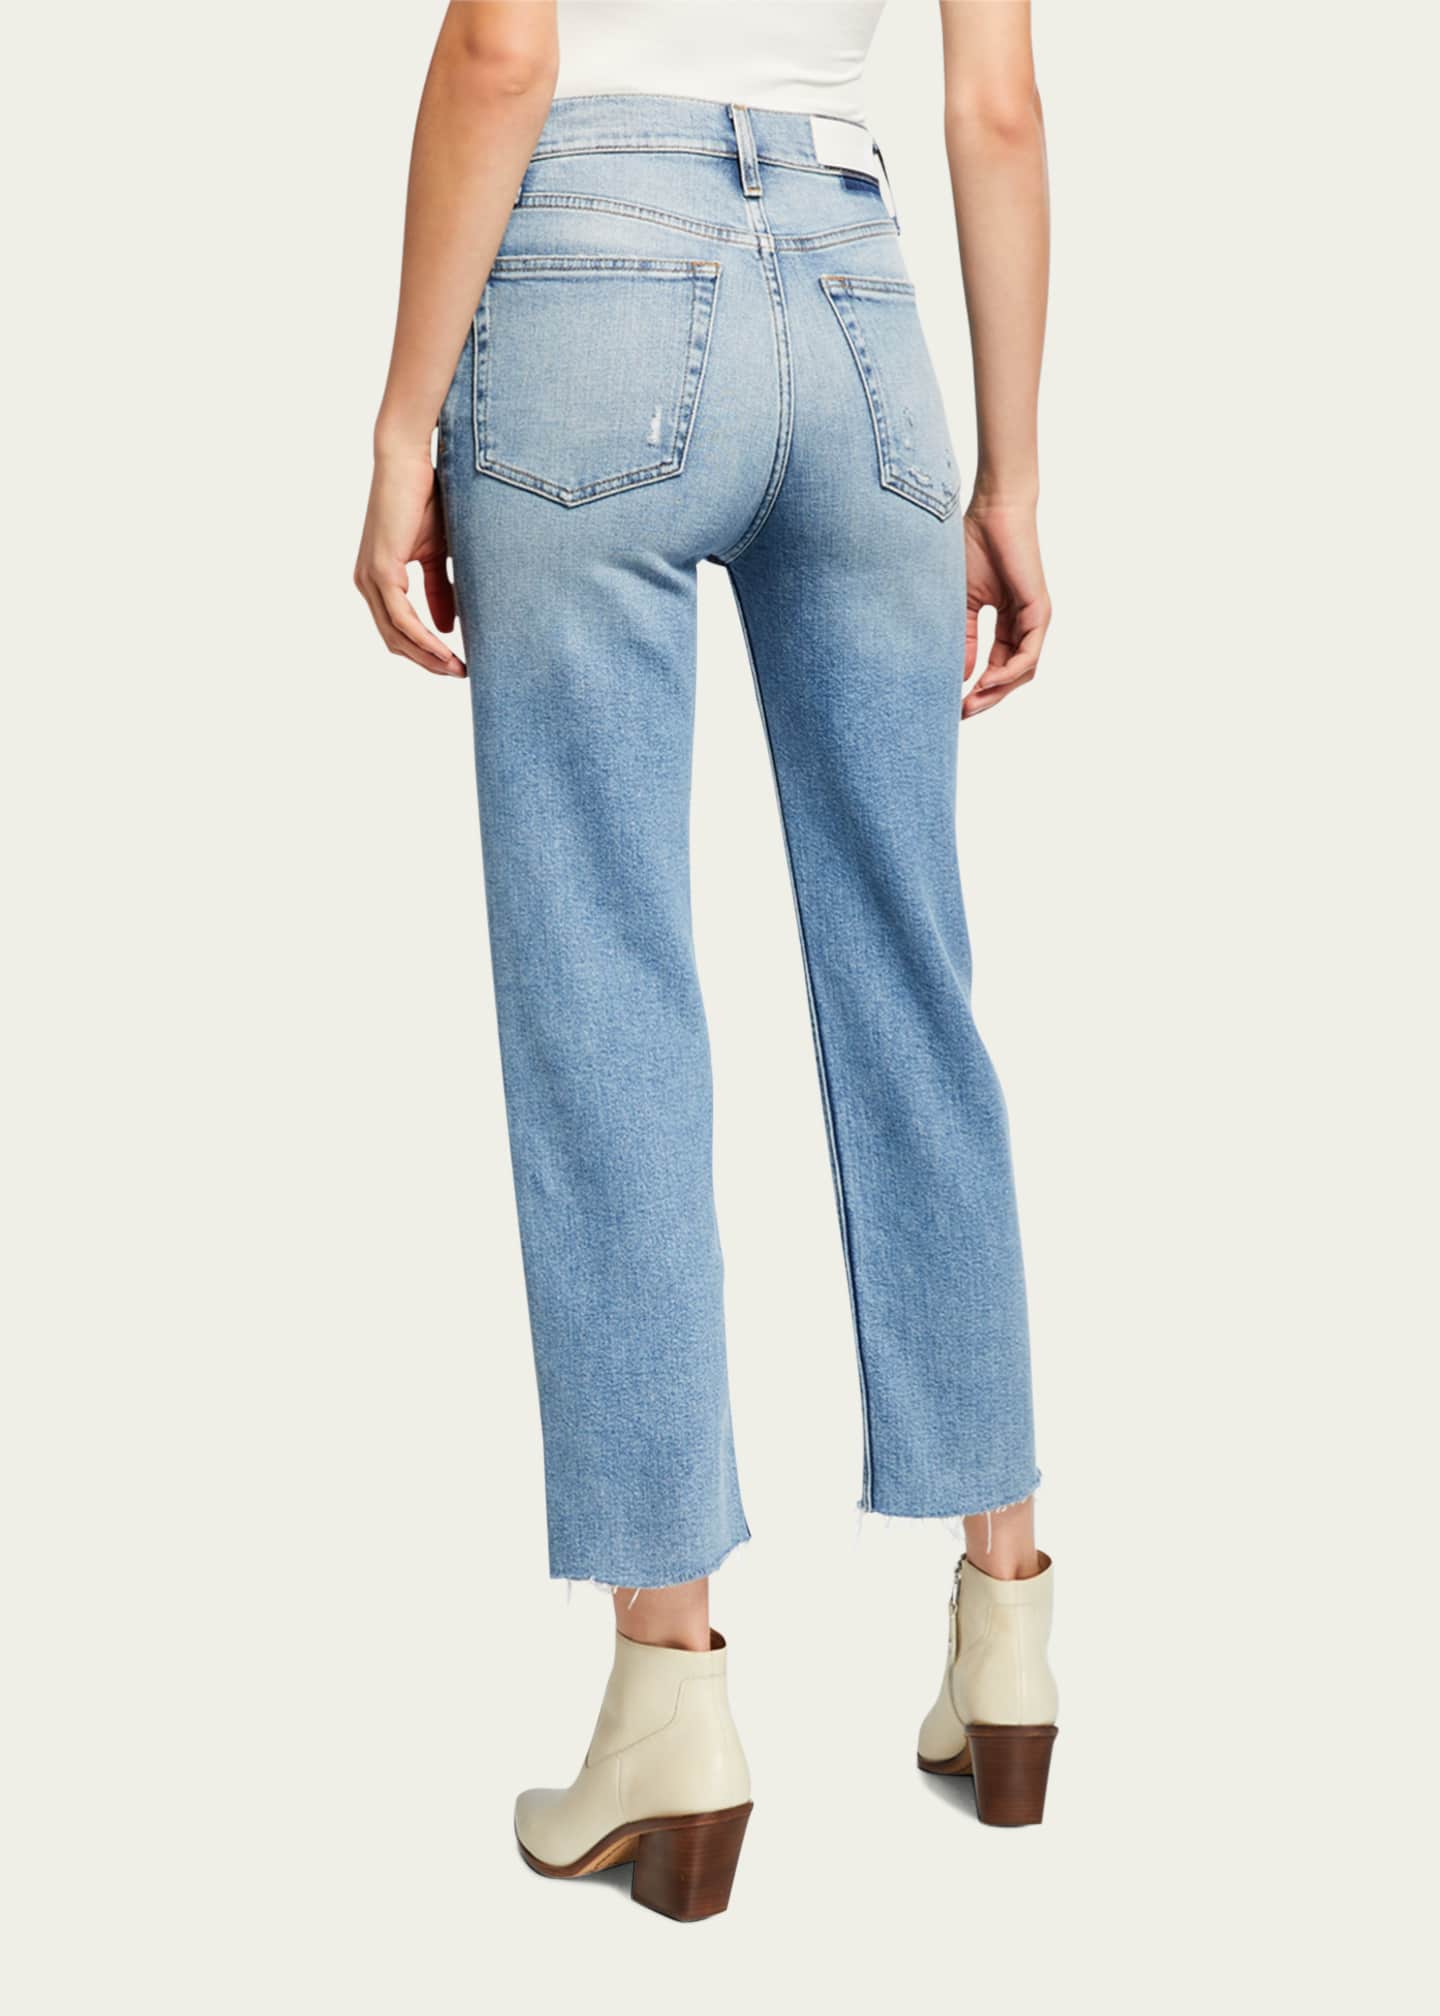 RE/DONE Stovepipe Raw Hem Jeans - Farfetch